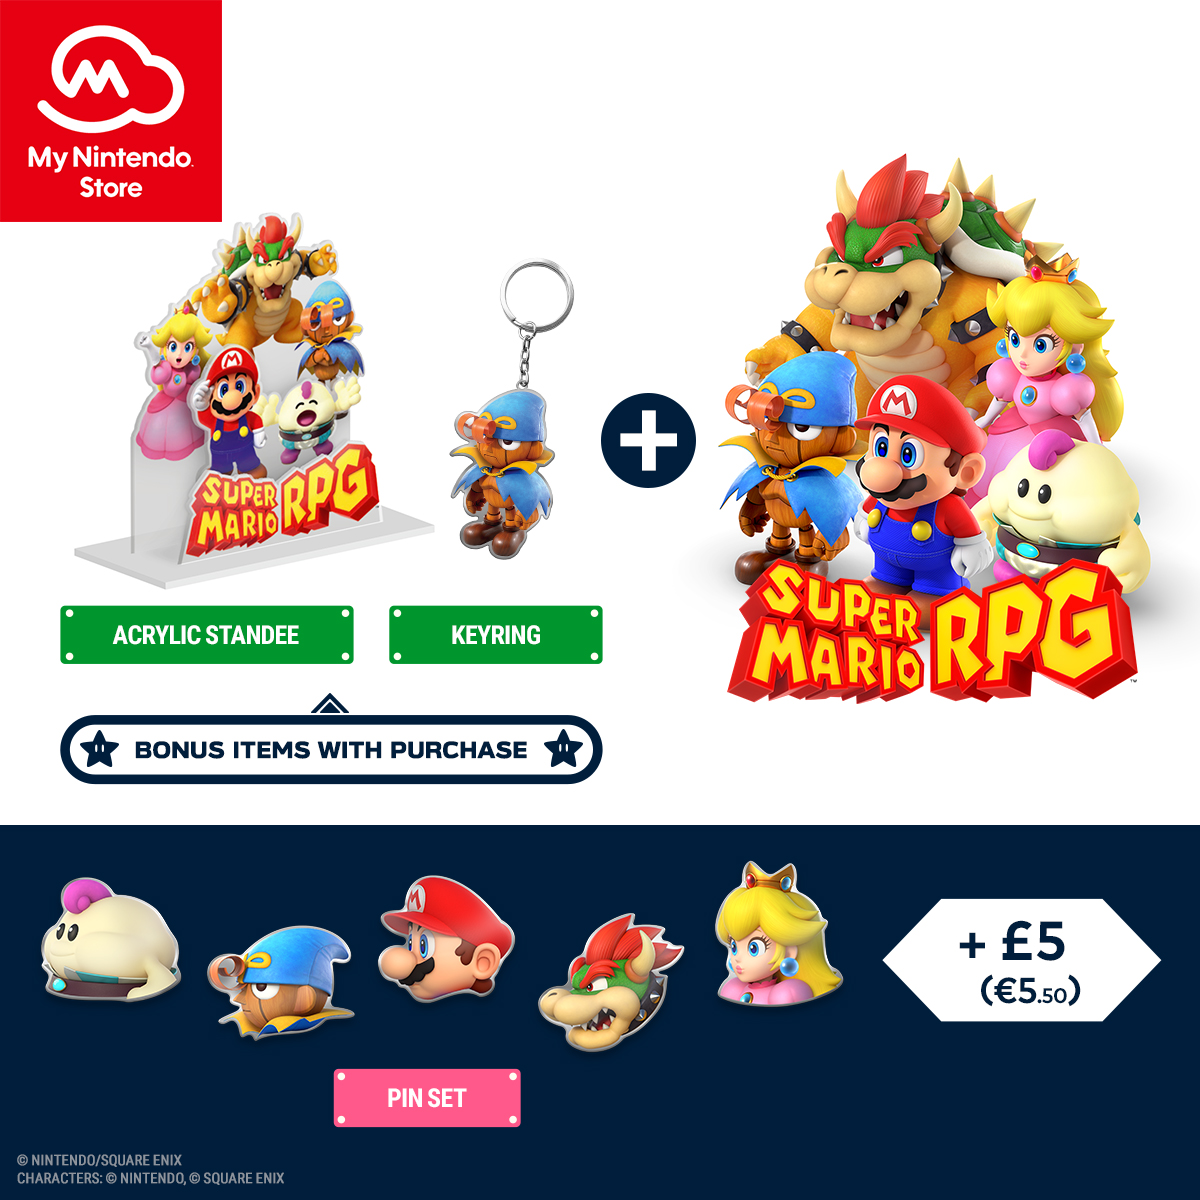 You can now pre-order Super Mario RPG on My Nintendo Store and receive a key chain and acrylic standee as bonus items with purchase!